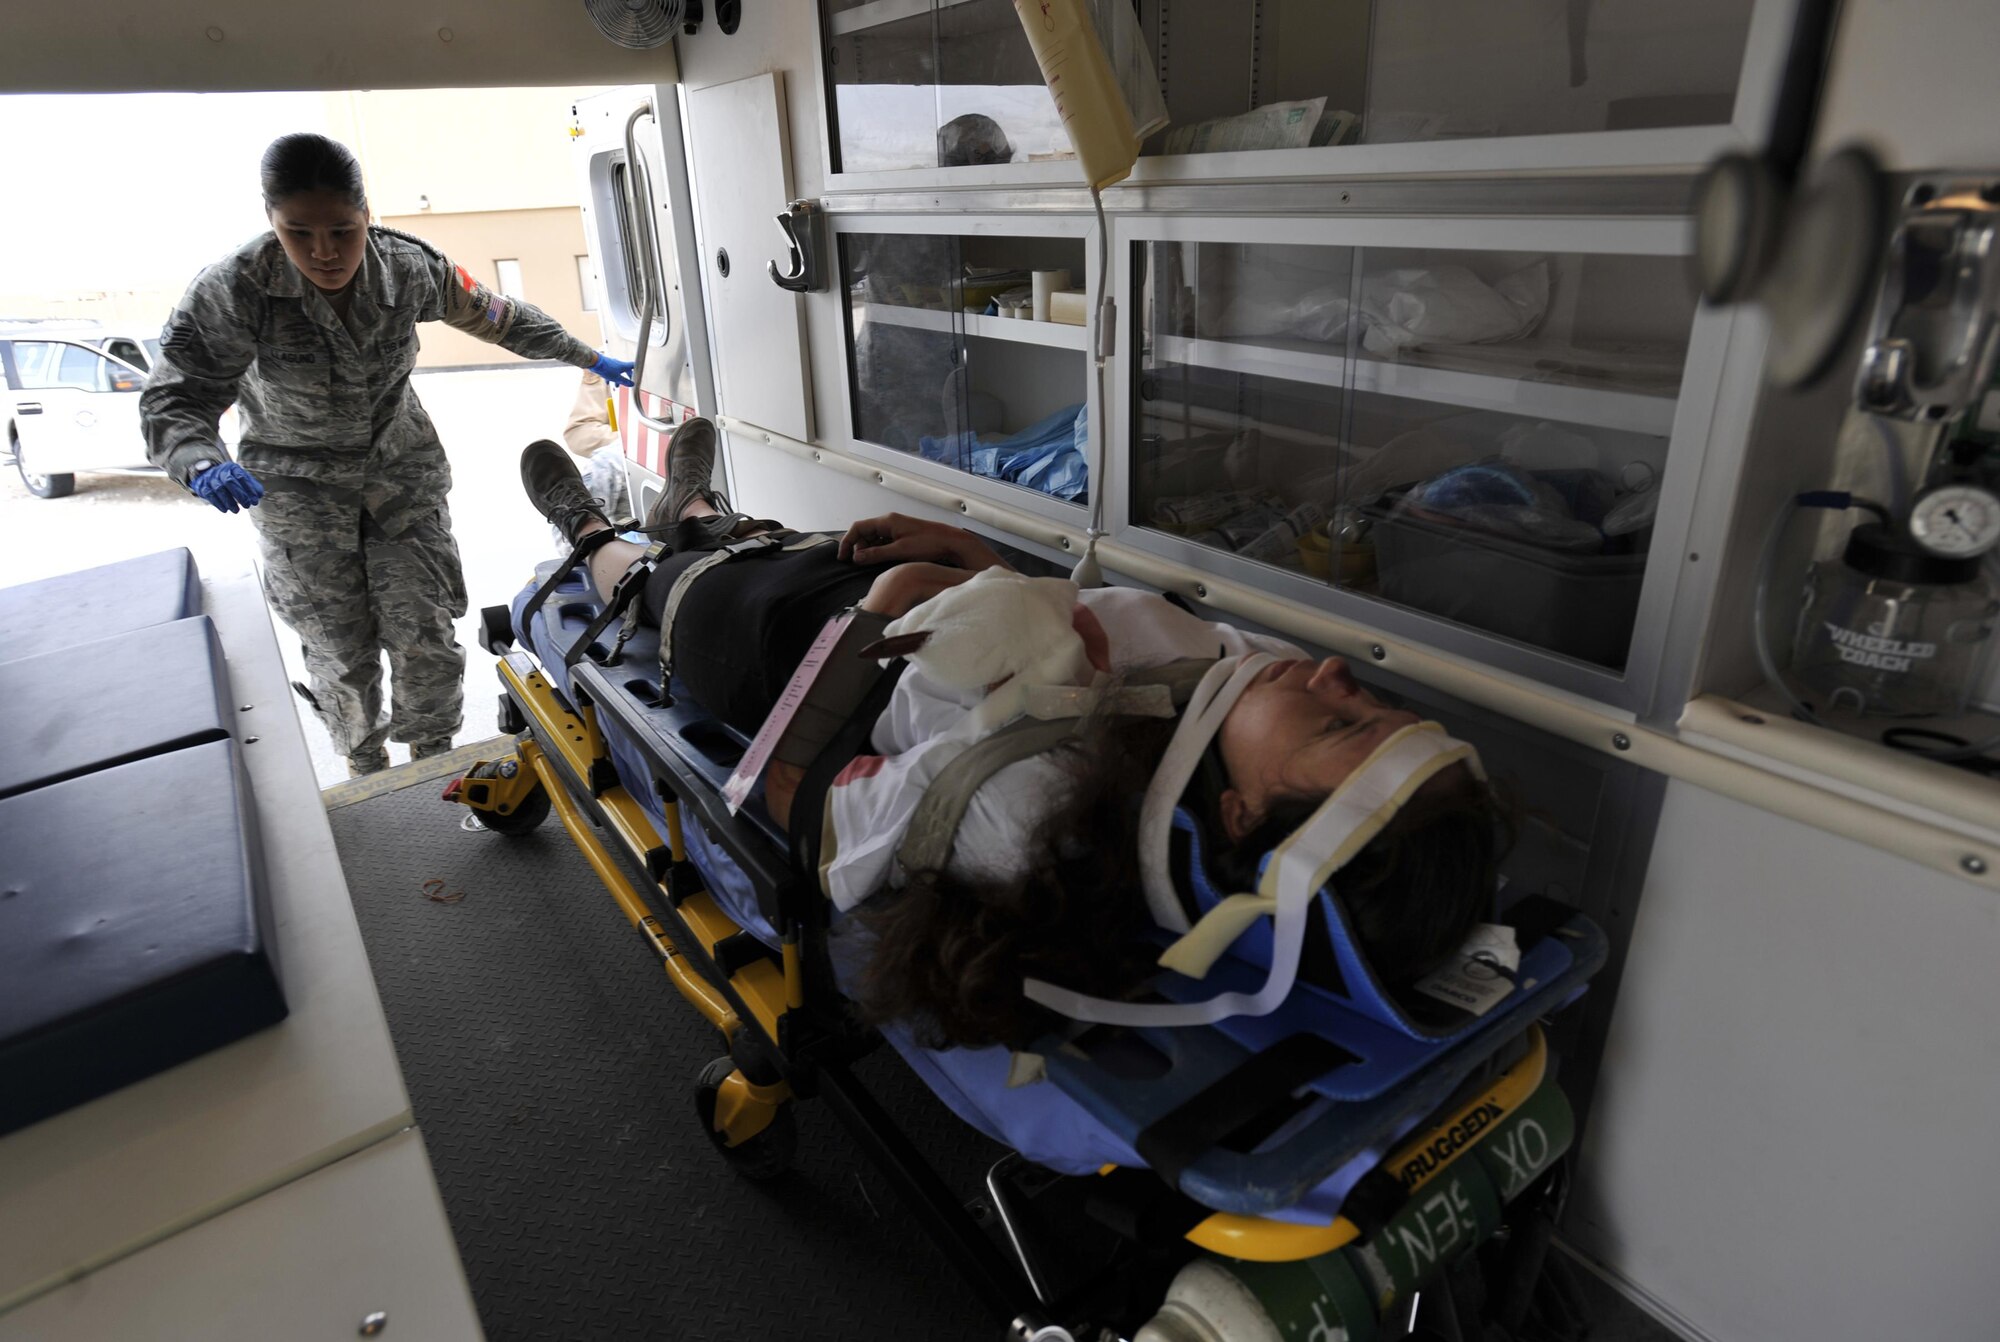 Staff Sgt. Mary Lynn Llaguno, 379th Expeditionary Medical Group, Al Udeid Air Base, Qatar, checks on a patient during a mass casualty exercise at AUAB, Dec. 15. The exercise tested the emergency response capabilities of fire and medical personnel. (U.S. Air Force photo by Master Sgt. Joshua Strang)